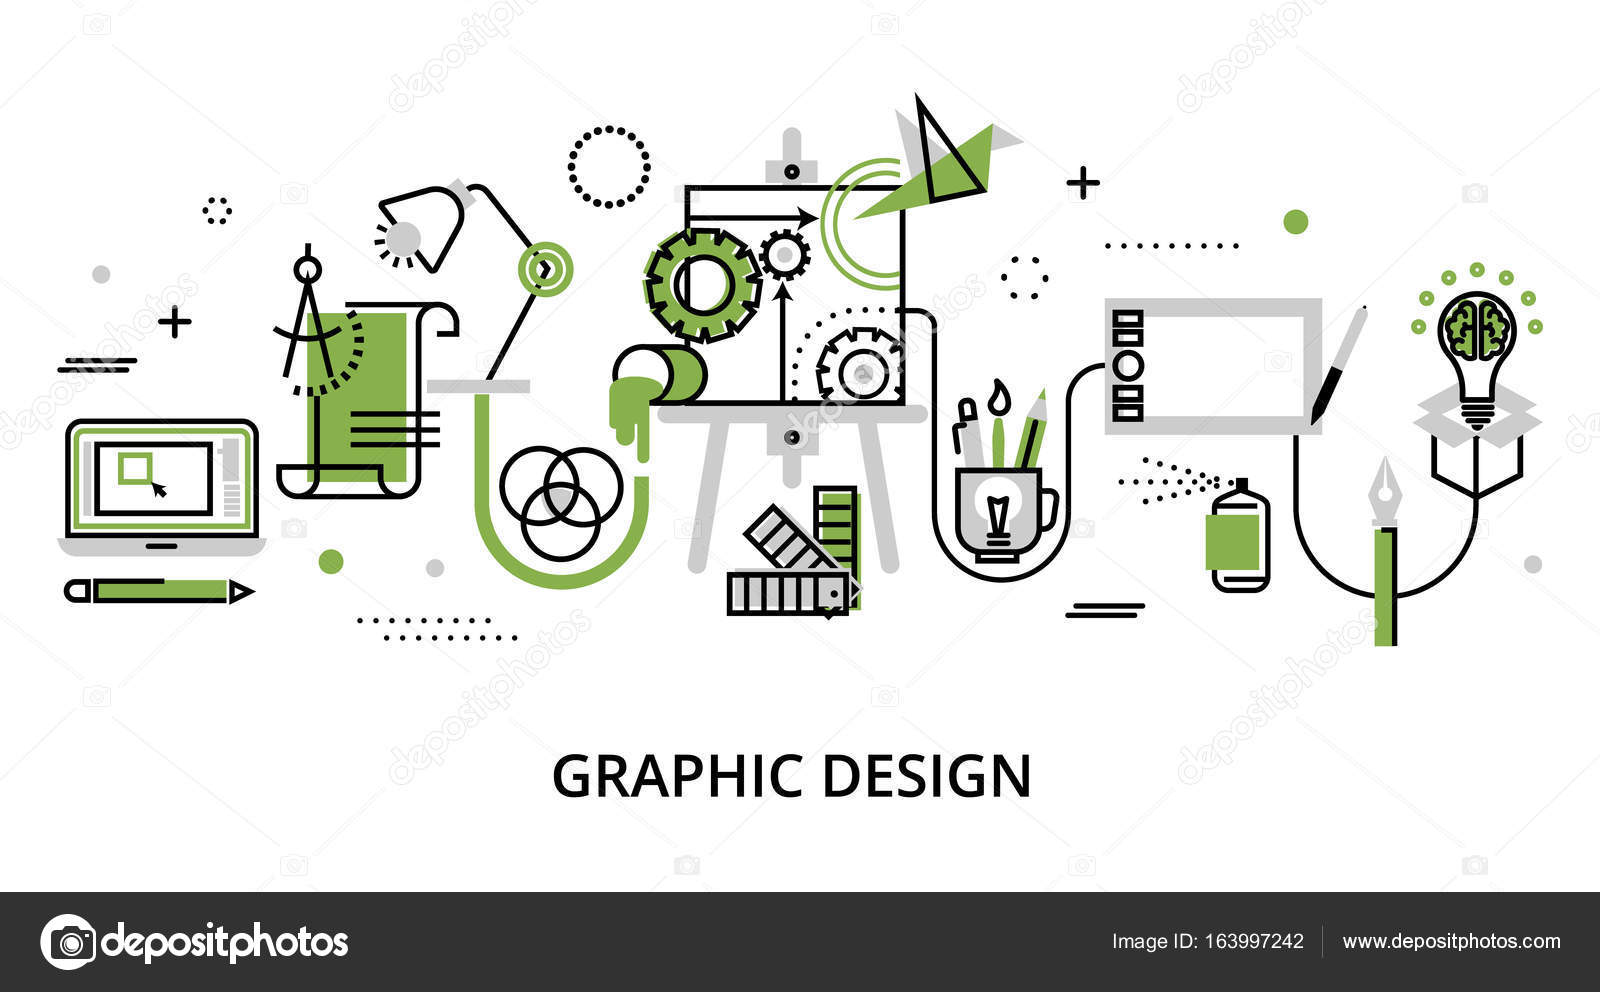 Graphic design and designer tools concept Vector Image